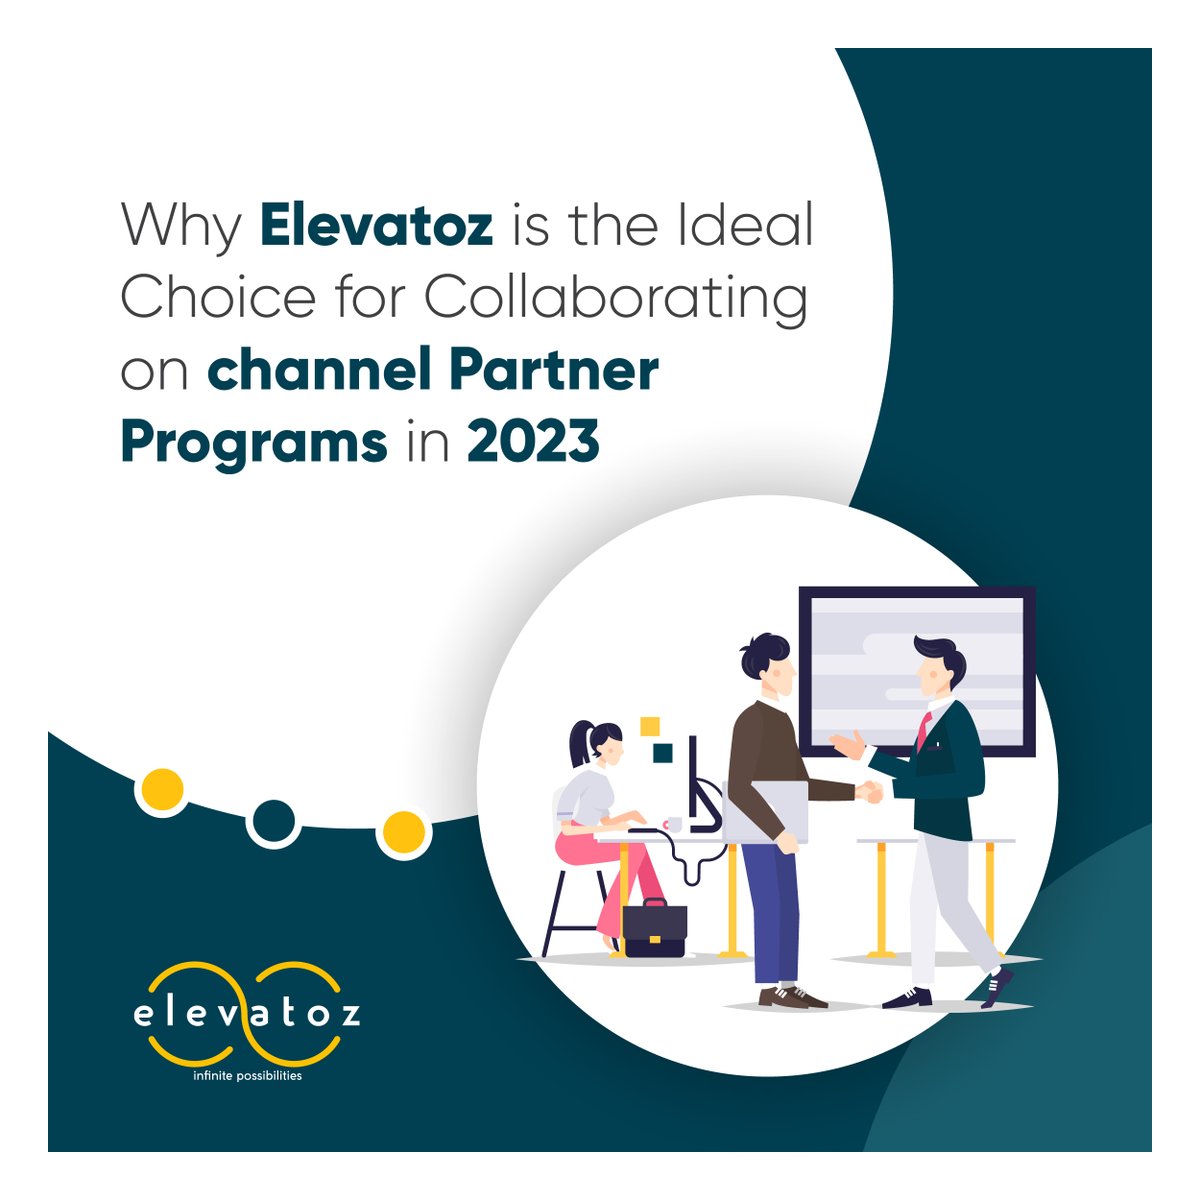 Elevate Loyalty with Elevatoz! Your Trusted Partner for Memorable Loyalty Experiences Join us in crafting success stories through personalized loyalty solutions! Read more: linkedin.com/feed/update/ur… #LoyaltyPrograms #Partnerships #Innovation #ElevatozLoyalty #CustomerExperience